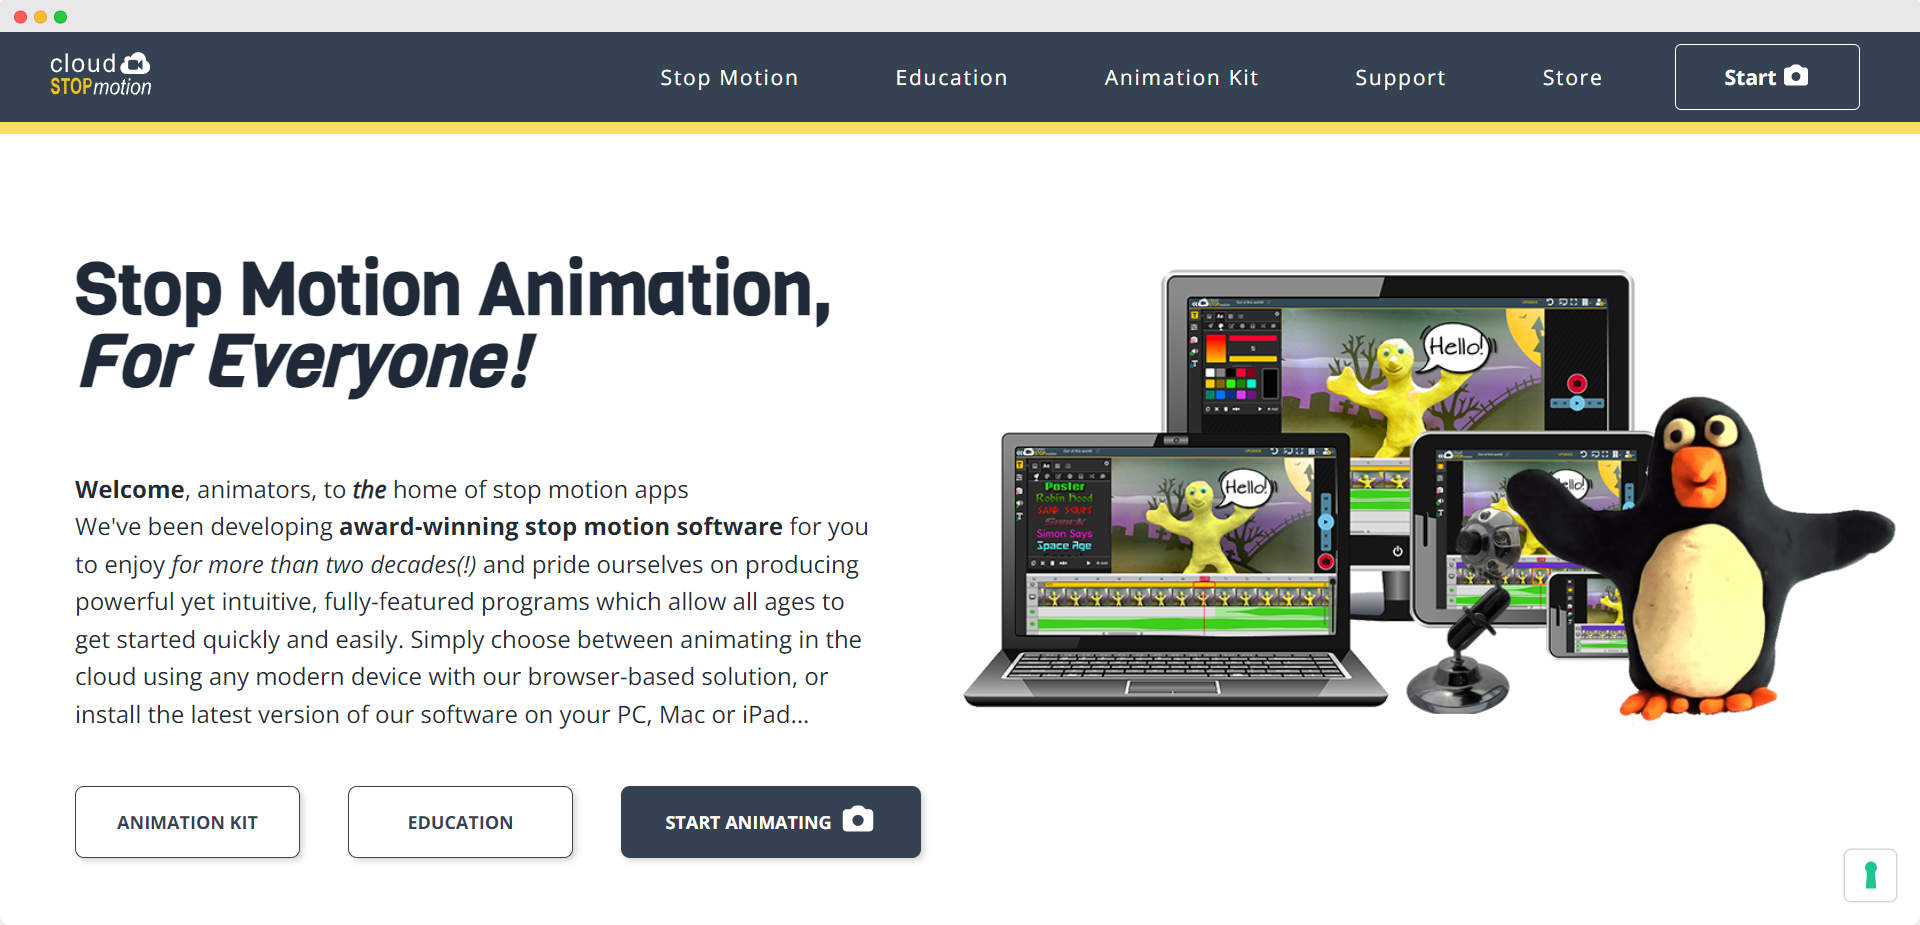 Cloud Stop Motion animation software